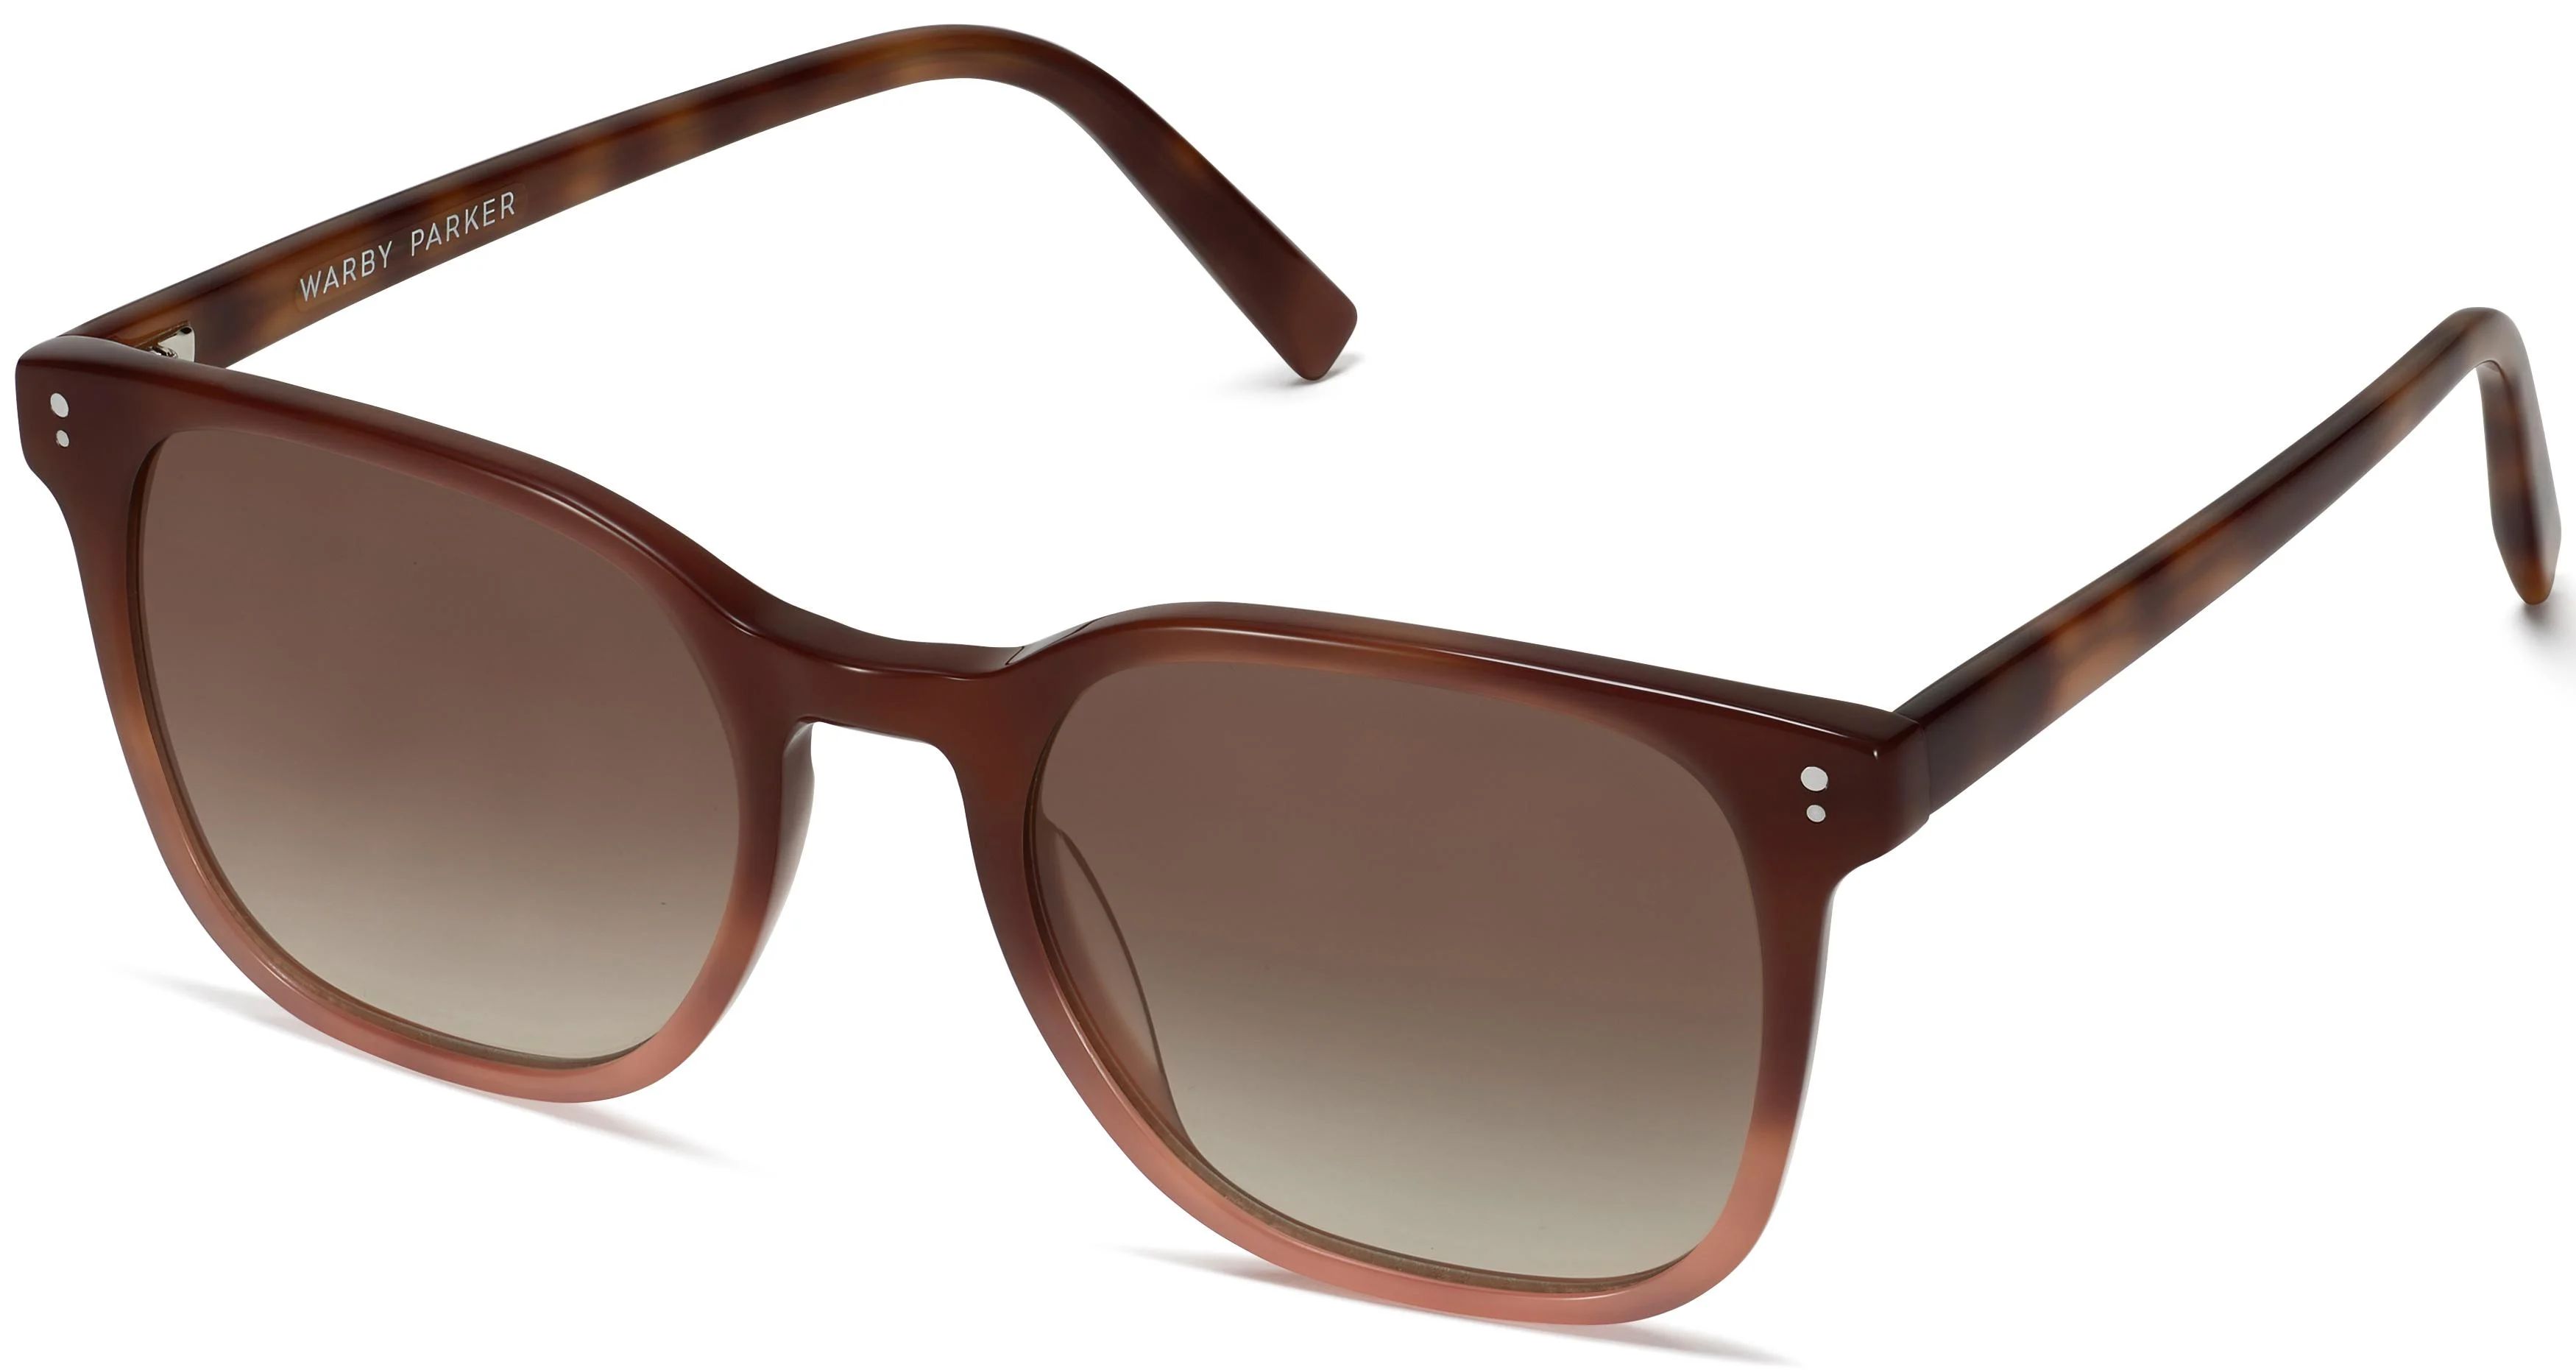 Rosie Sunglasses in Mulberry Tortoise Fade | Warby Parker | Warby Parker (US)